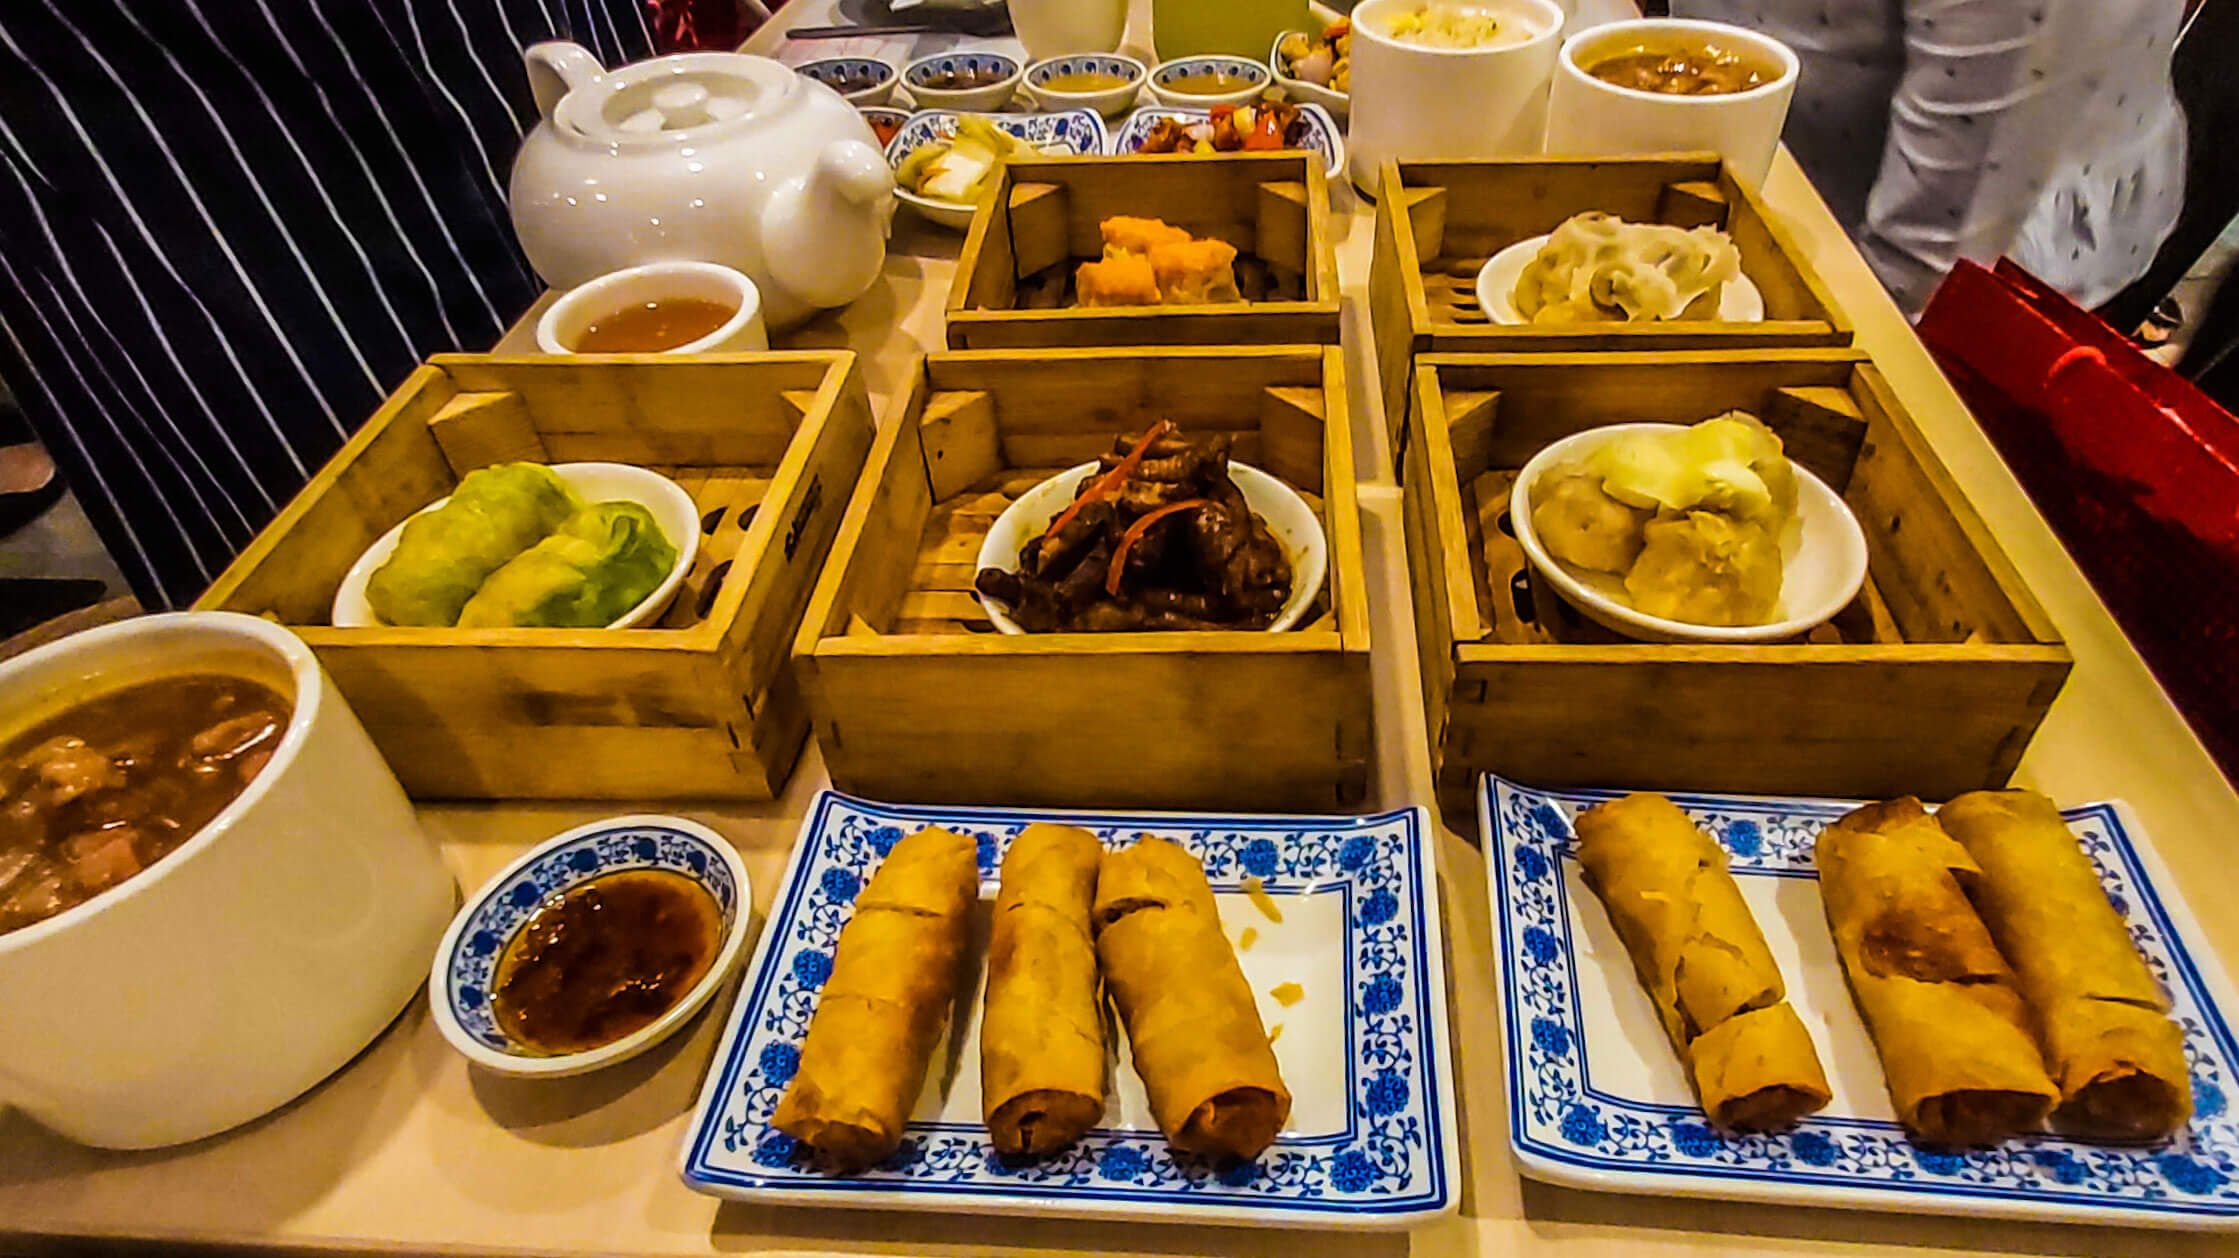 ICONIC DIMSUM SPREAD. Harbour City Group’s restaurant journey started in 1969 with the very first Ding How branch along Colon Street. This was where the Cebu staple “steamed fried rice” was first introduced.